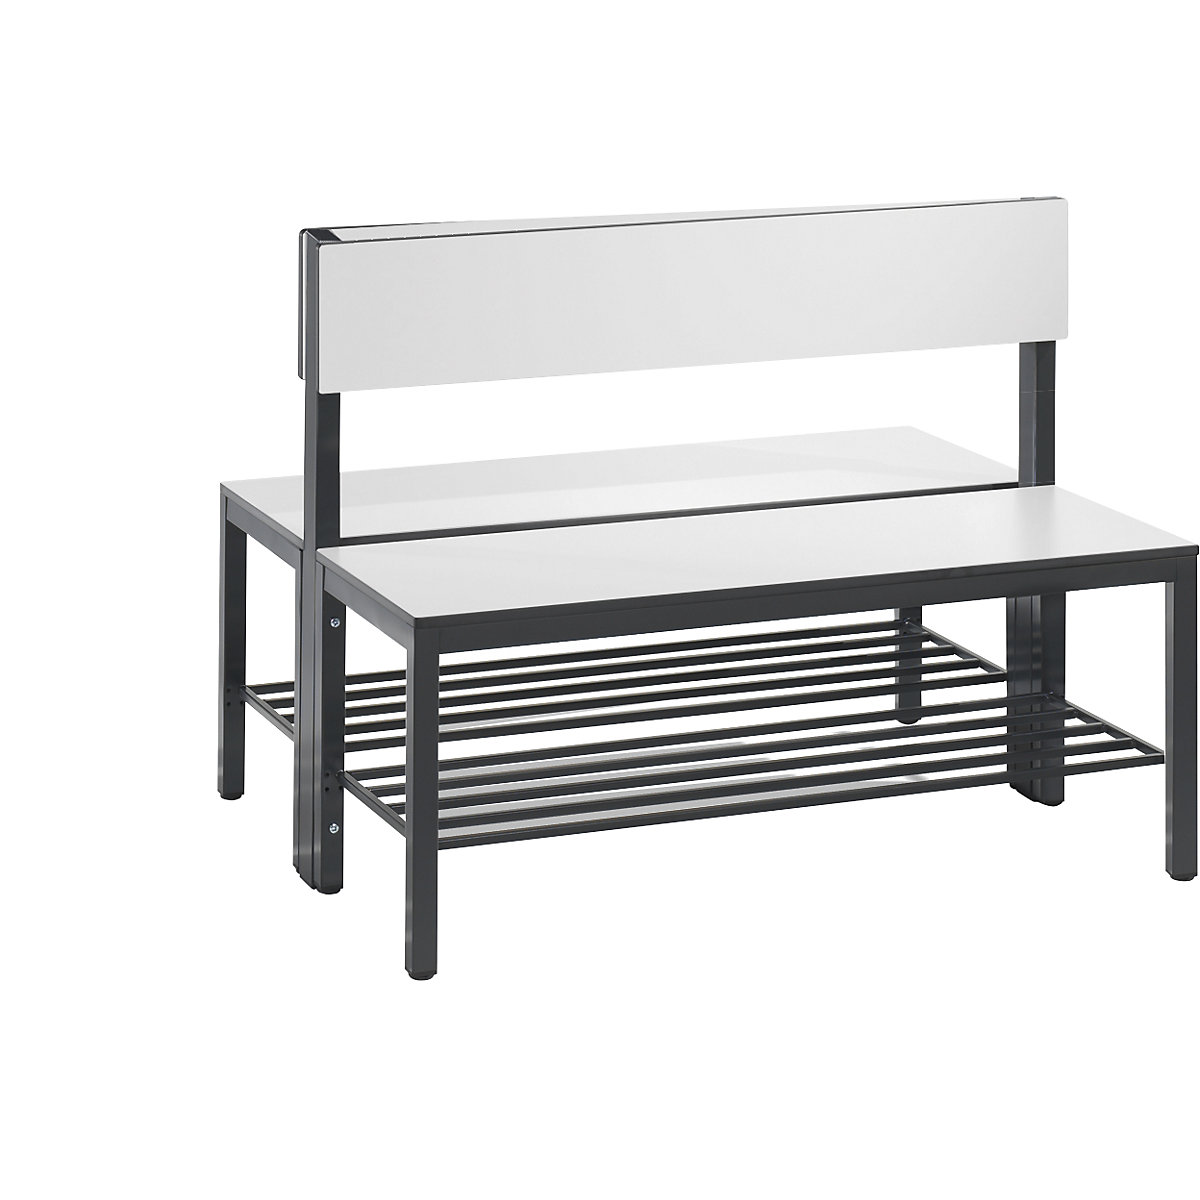 BASIC PLUS cloakroom bench, double sided - C+P